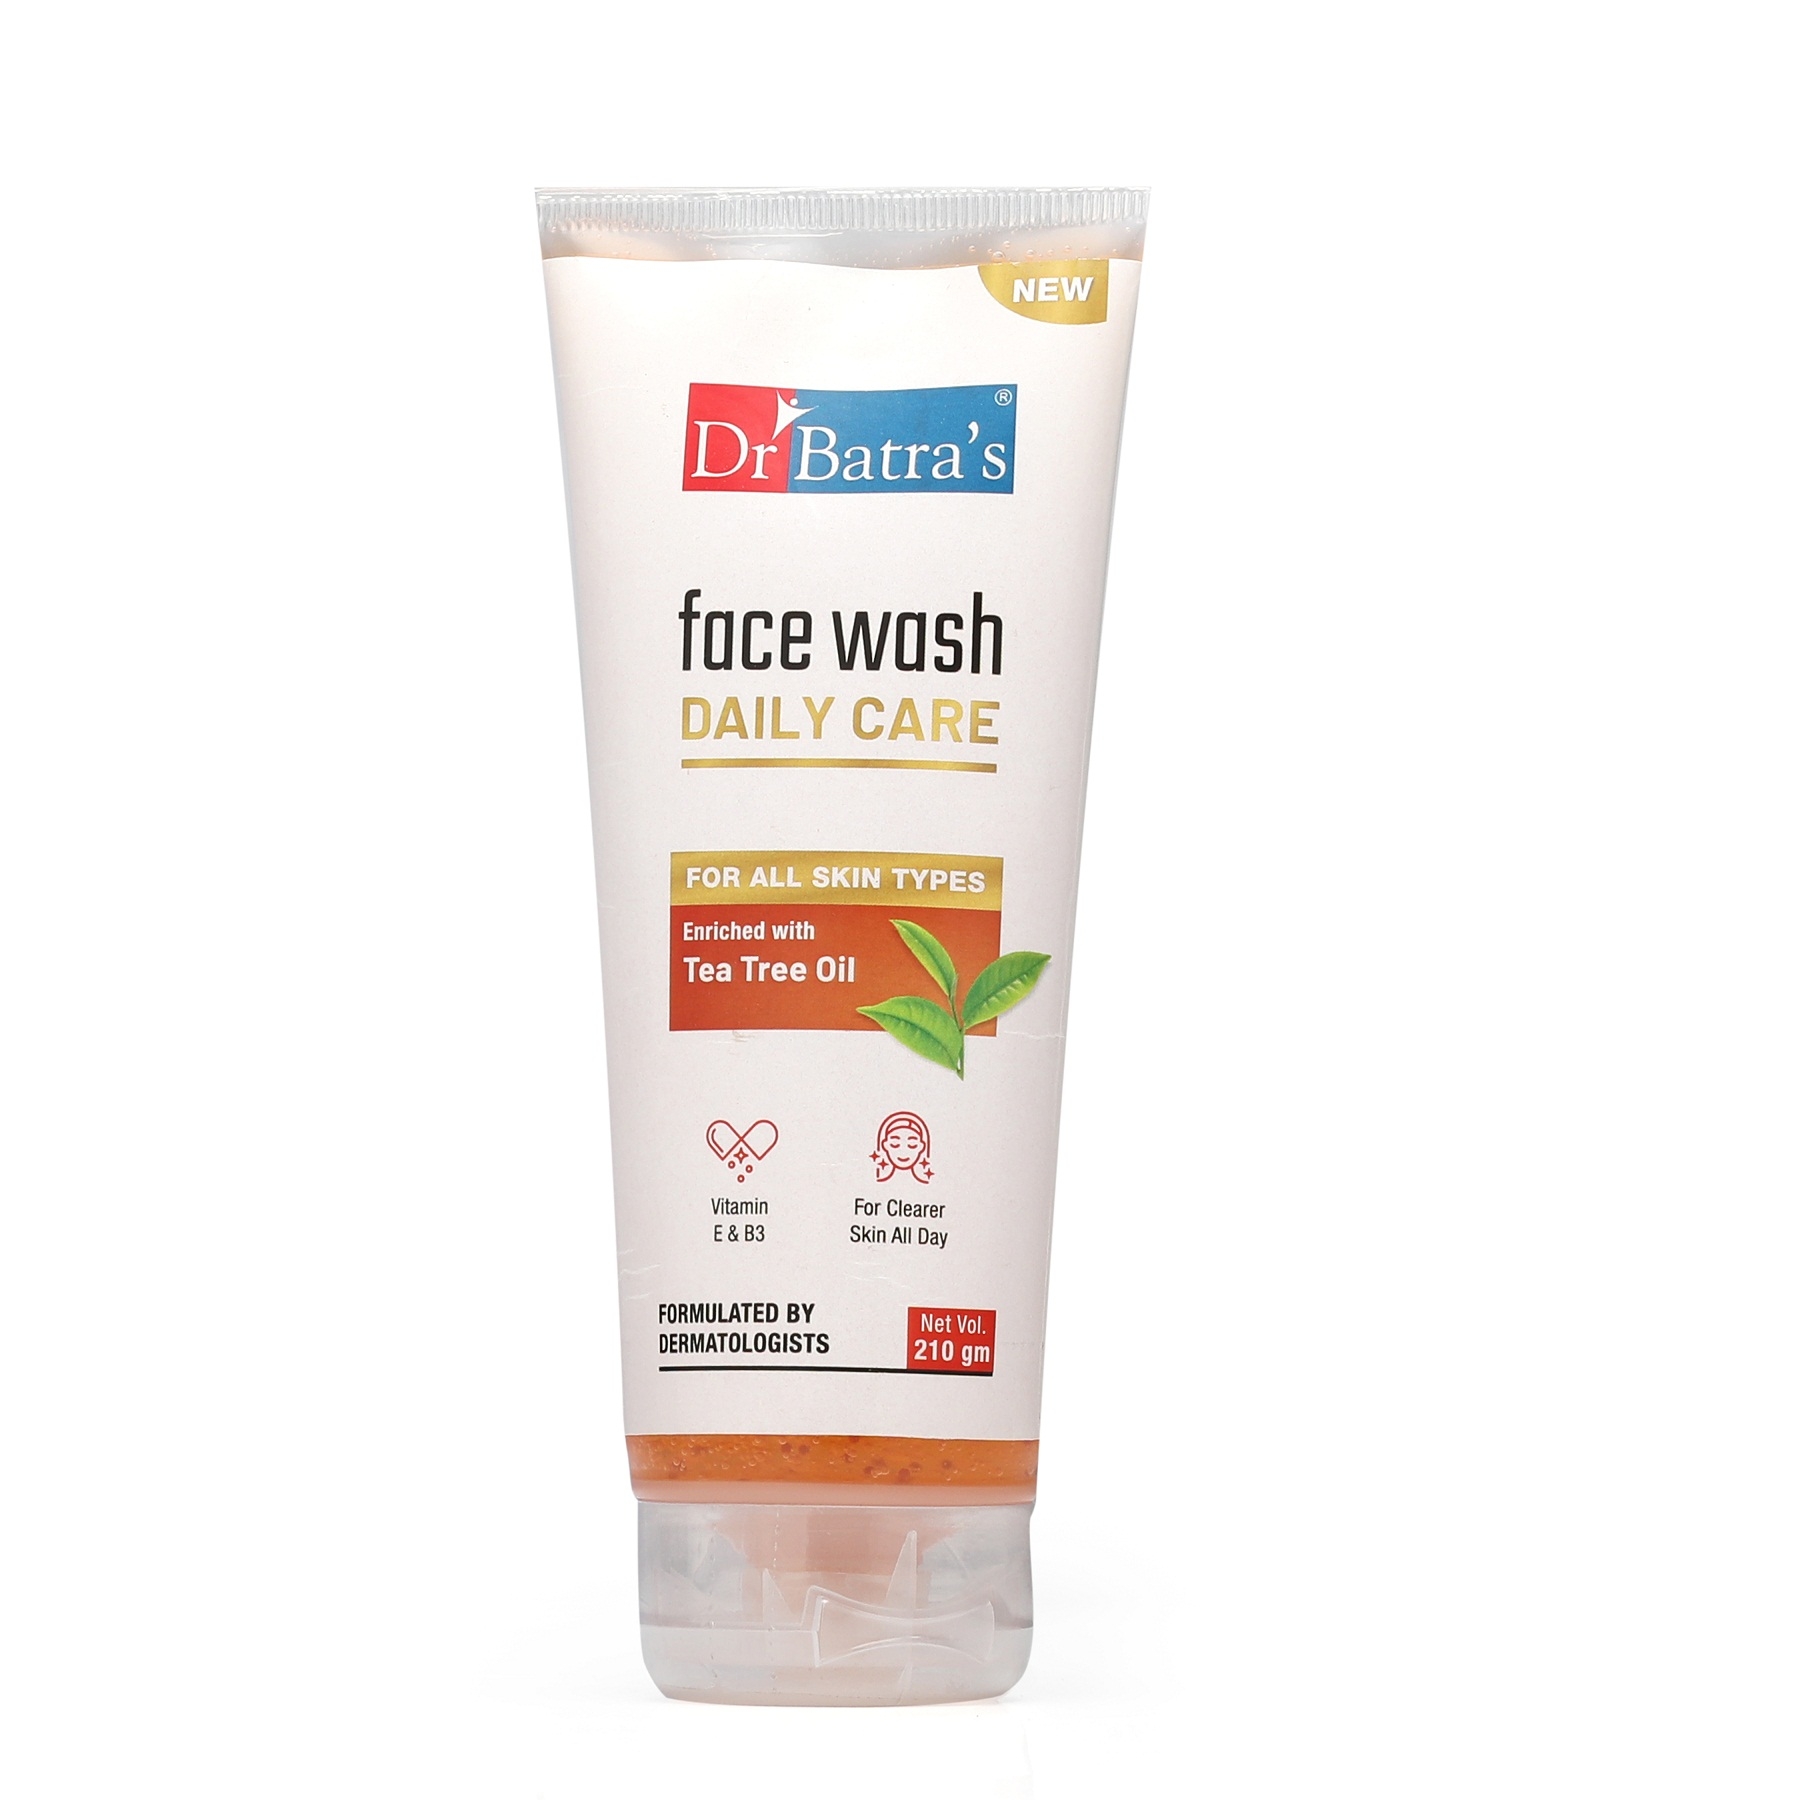 Dr Batra's | Dr Batra's Face Wash Daily Care Enriched With Tea Tree Oil - 210g